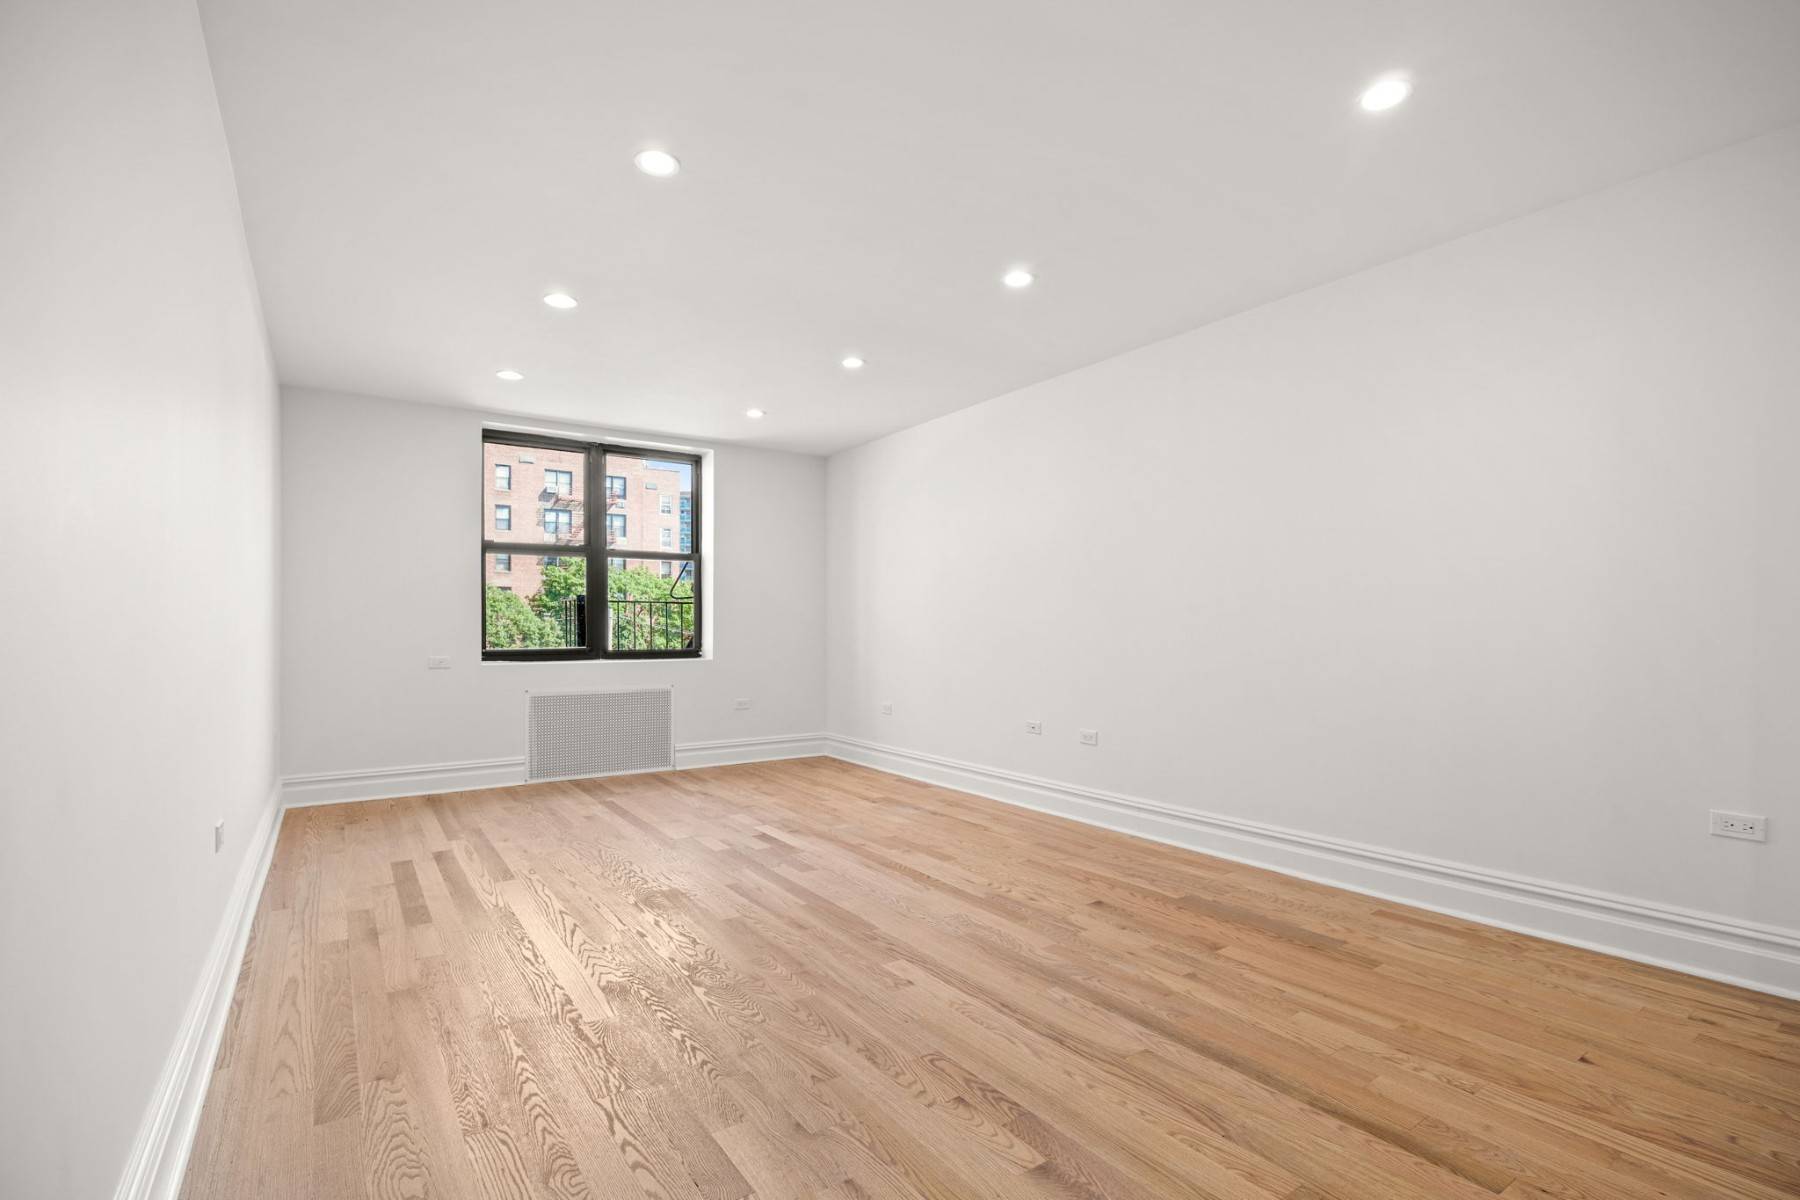 Welcome to the newest Rego Park condo conversion development !